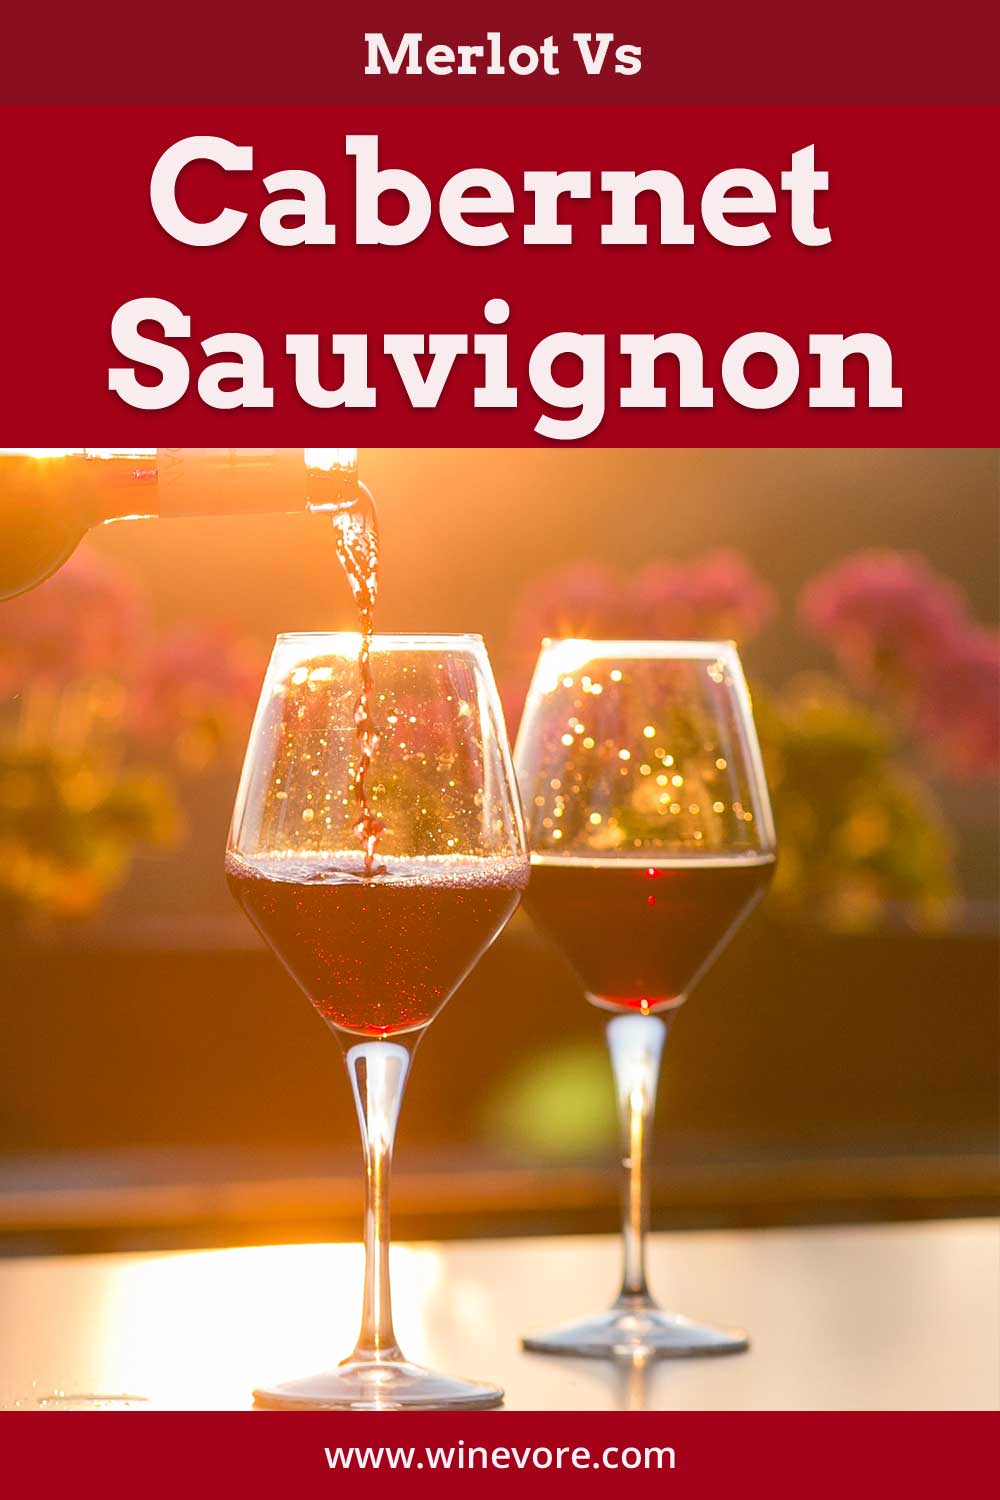 Pouring red wine into a glass of wine while another glass is placed near it - Merlot Vs Cabernet Sauvignon.